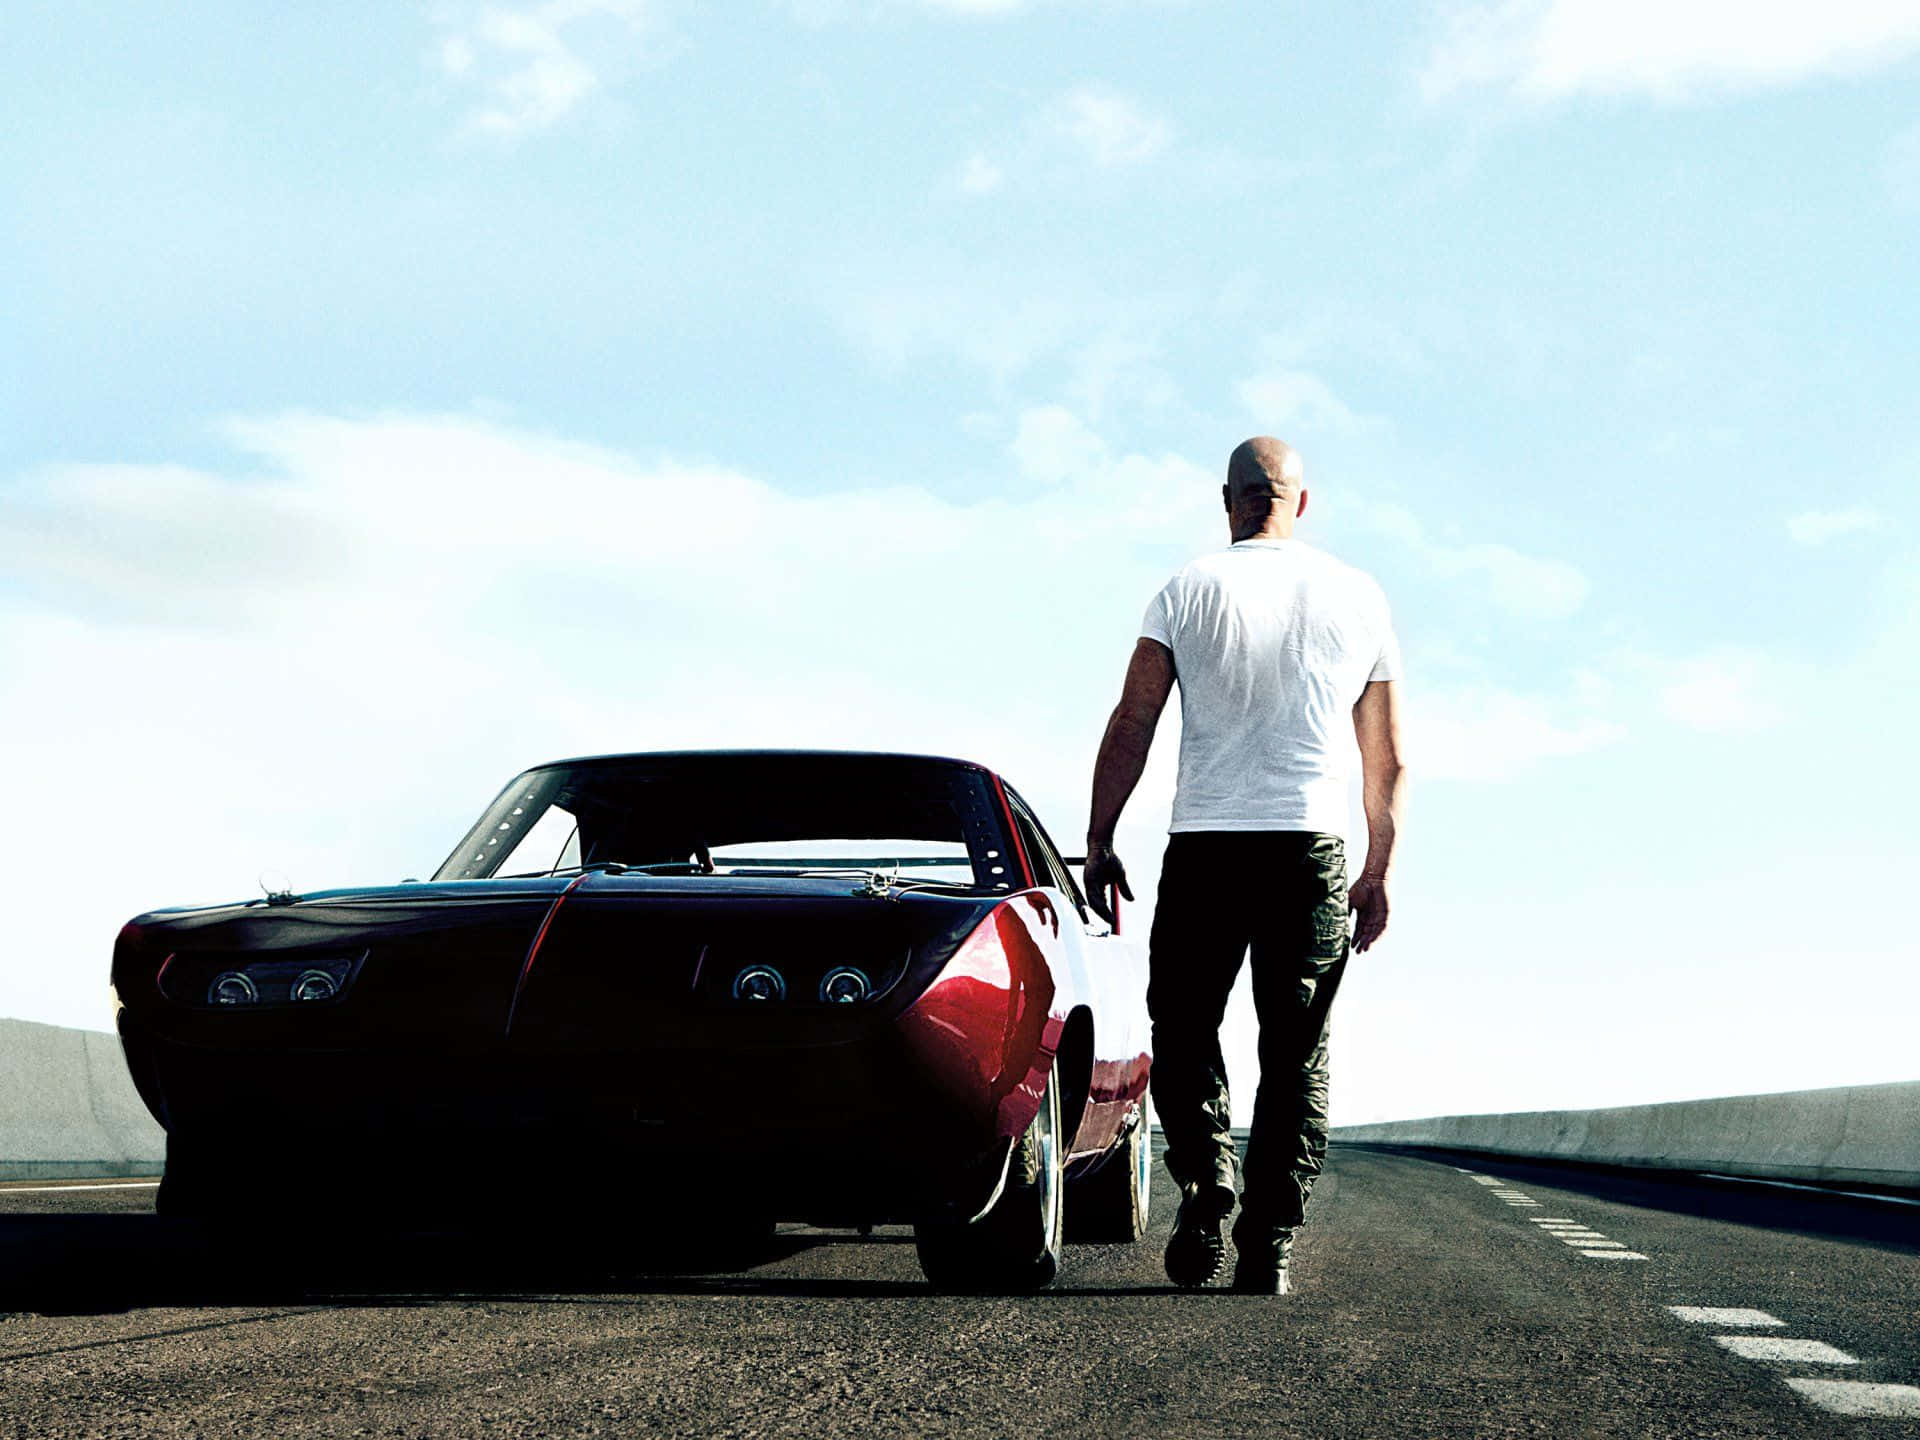 Dominic Checking His Car Fast And Furious 1 Wallpaper